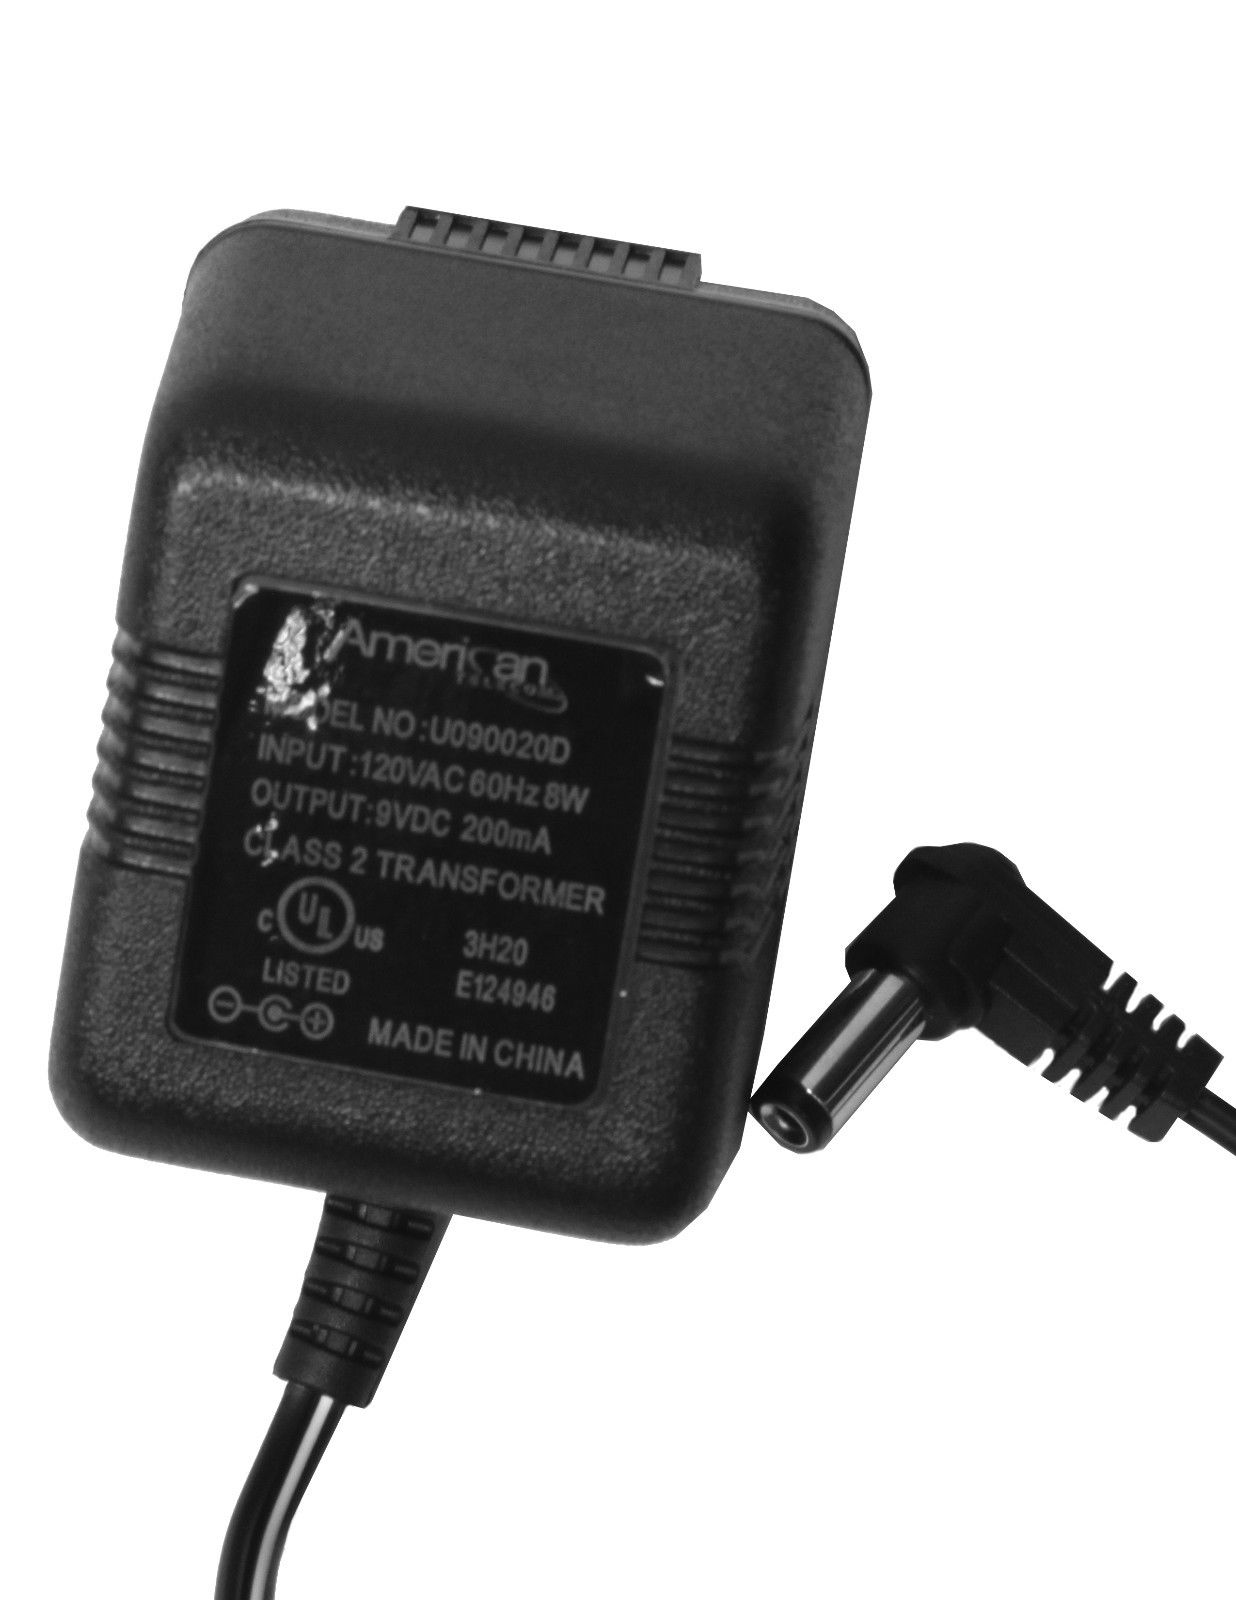 American U0900200 9 Volt Wall DC Power Adapter Charger 9VDC 200mA AC adapter